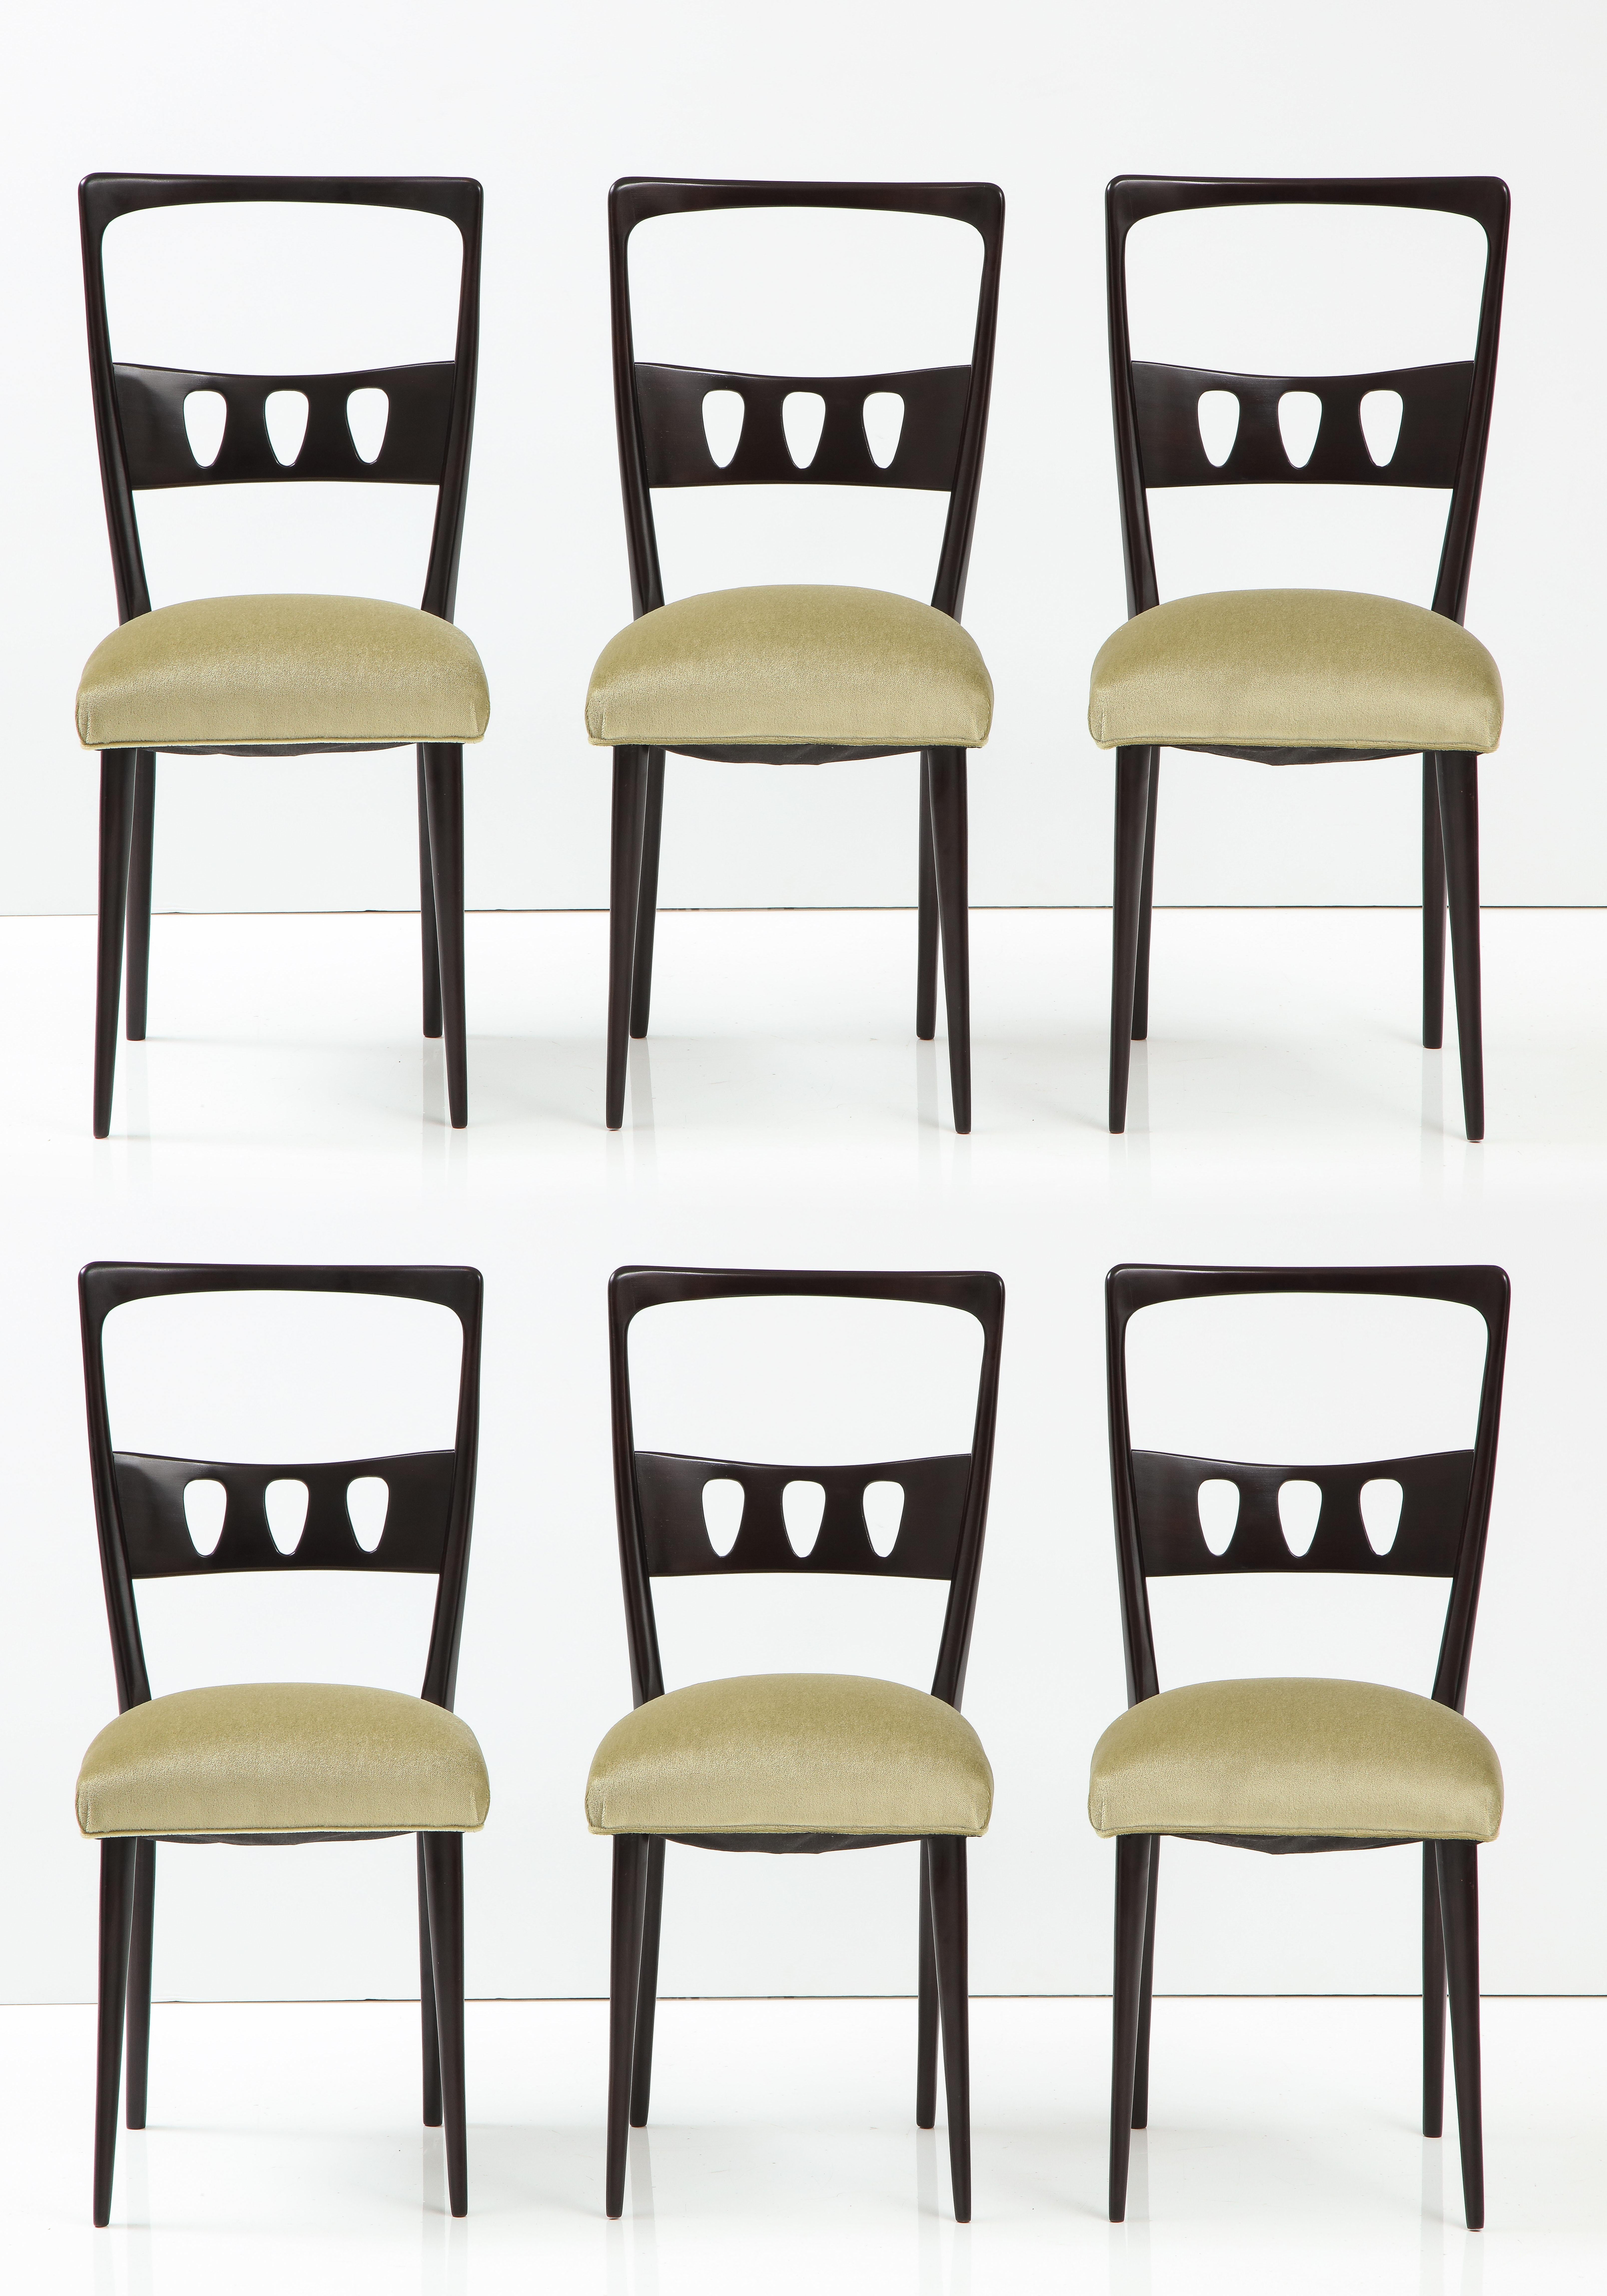 1950's Modernist high back Italian dining chairs set of six, fully restored with new Donghia Mohair fabric upholstery.